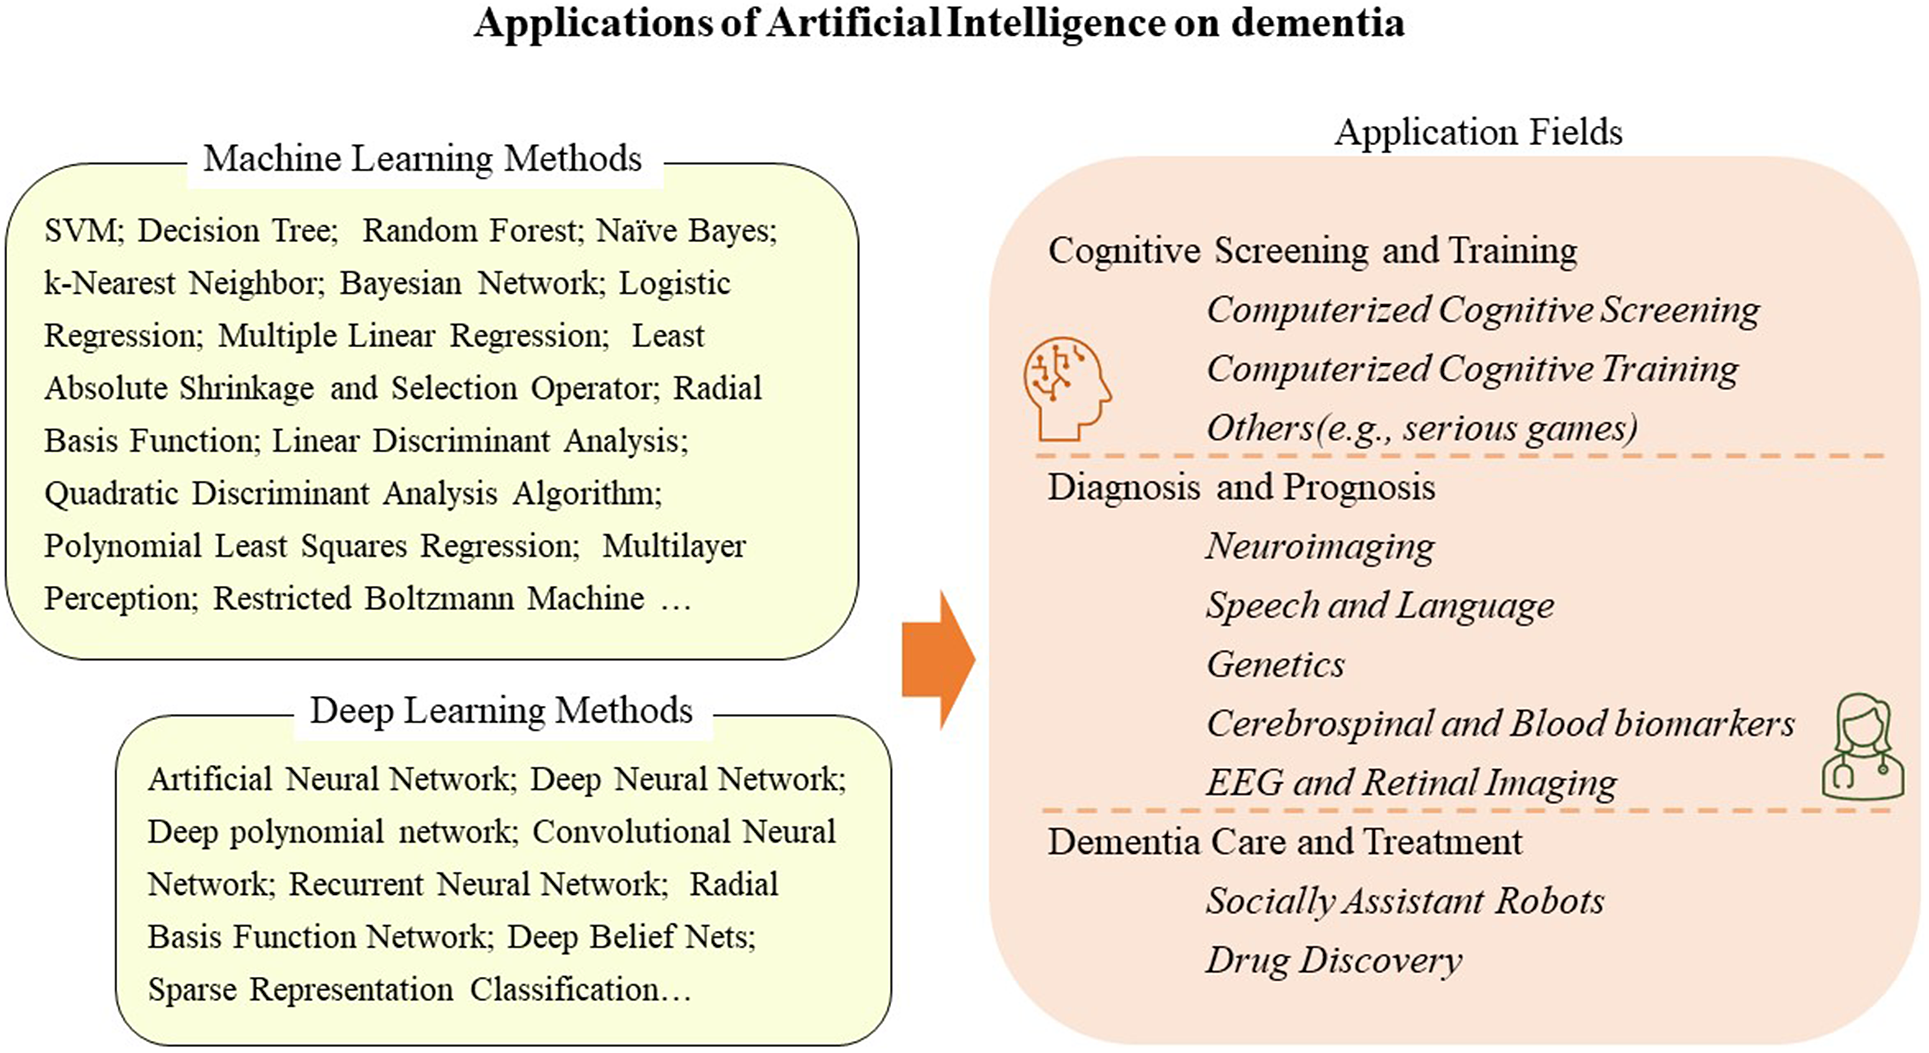 graphical abstract for Applications of artificial intelligence in dementia research - open in full screen